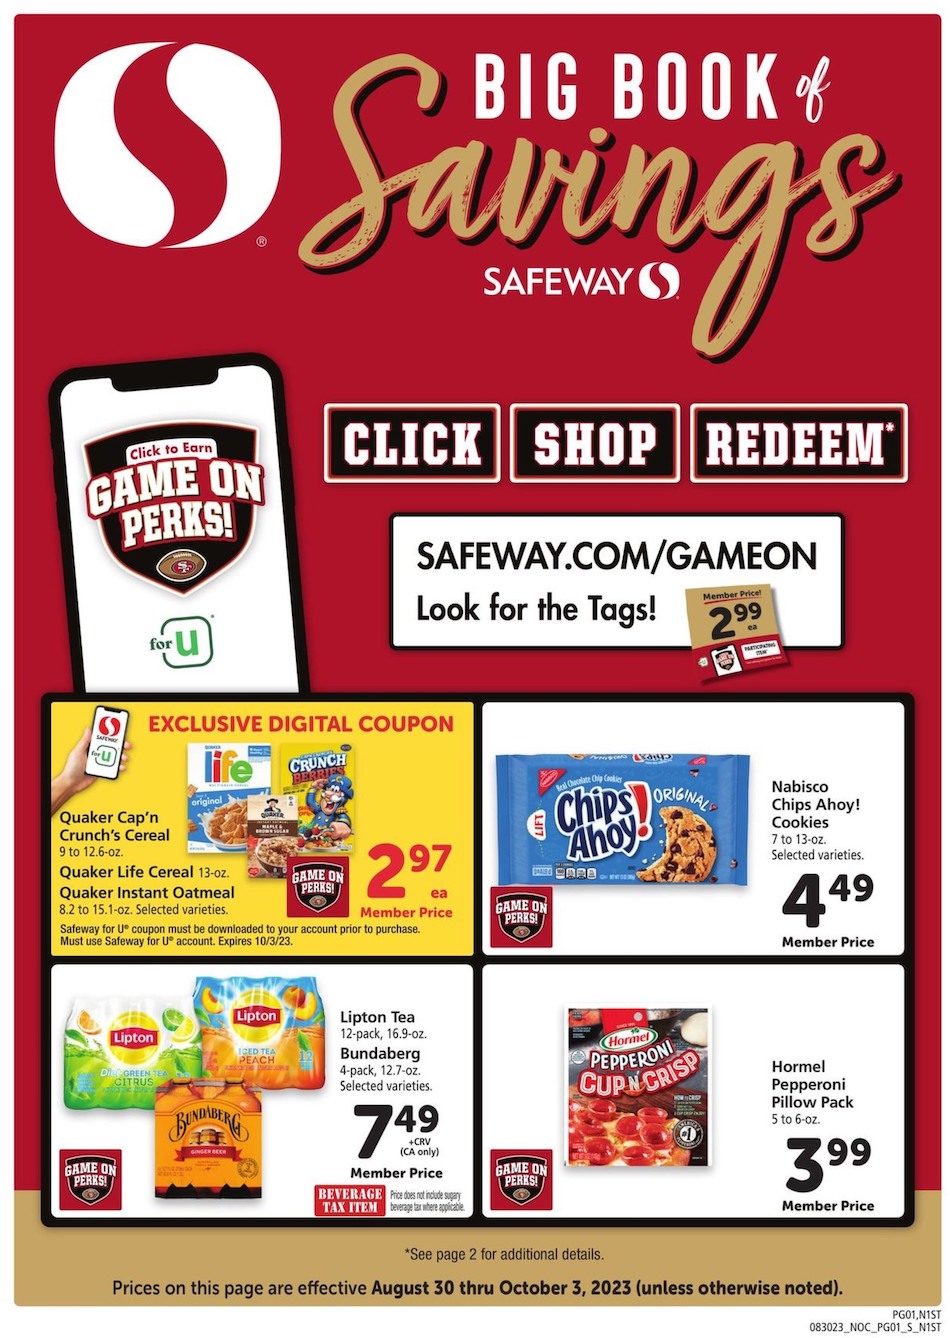 Safeway Big Book Savings 30th August – 3rd October 2023 Page 1